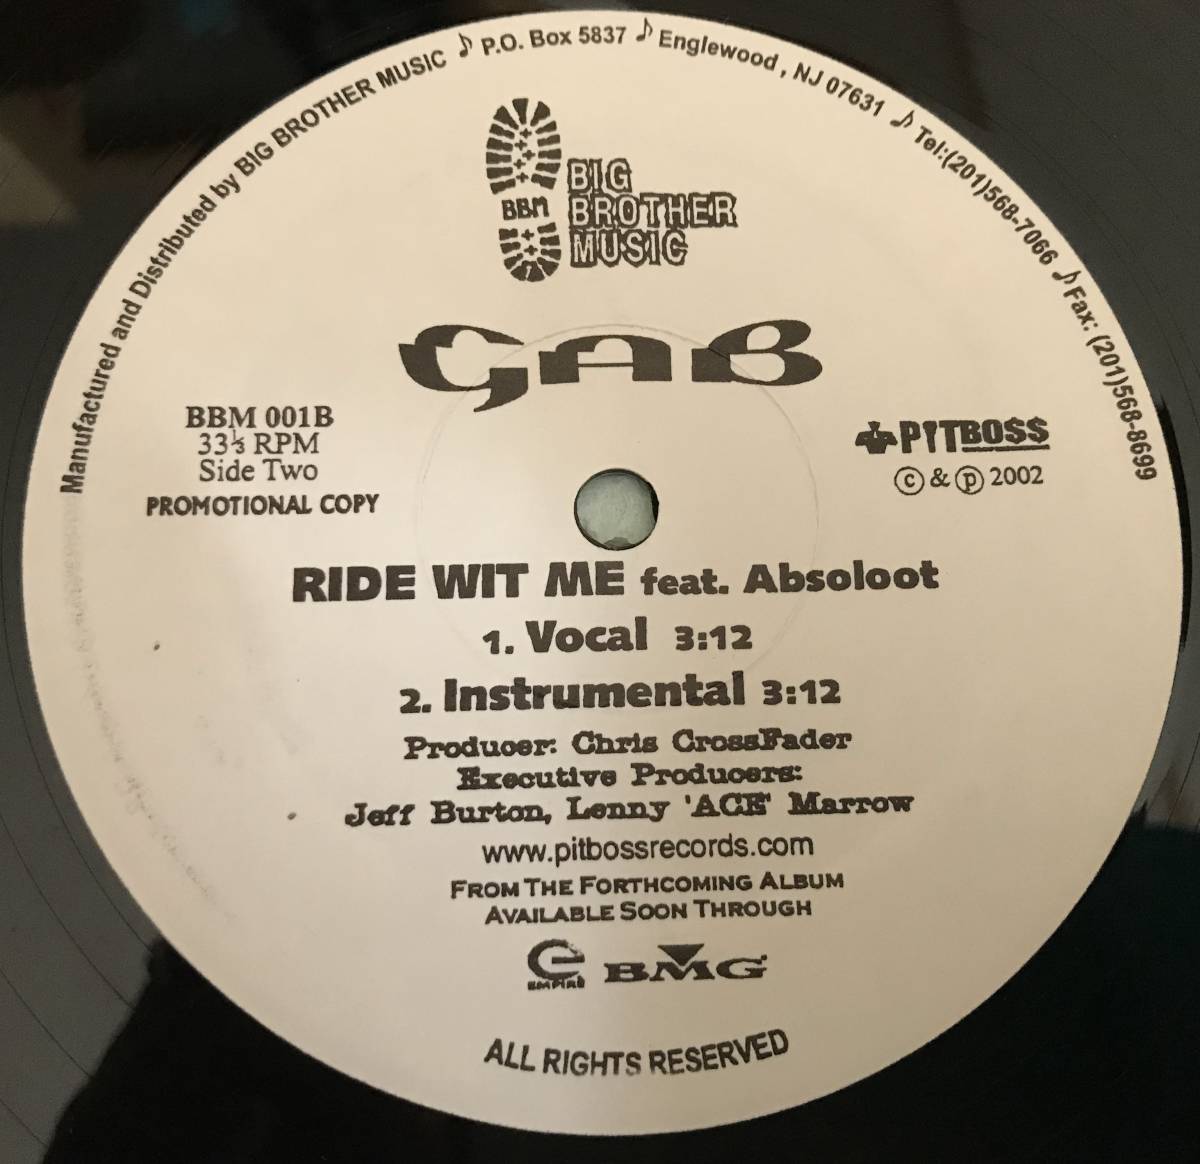 US PROMO ONLY / GAB / RIDE WIT ME FEAT ABSOLOOT / PIANO TRUCK が印象的なUNDER GROUND レア盤_画像1